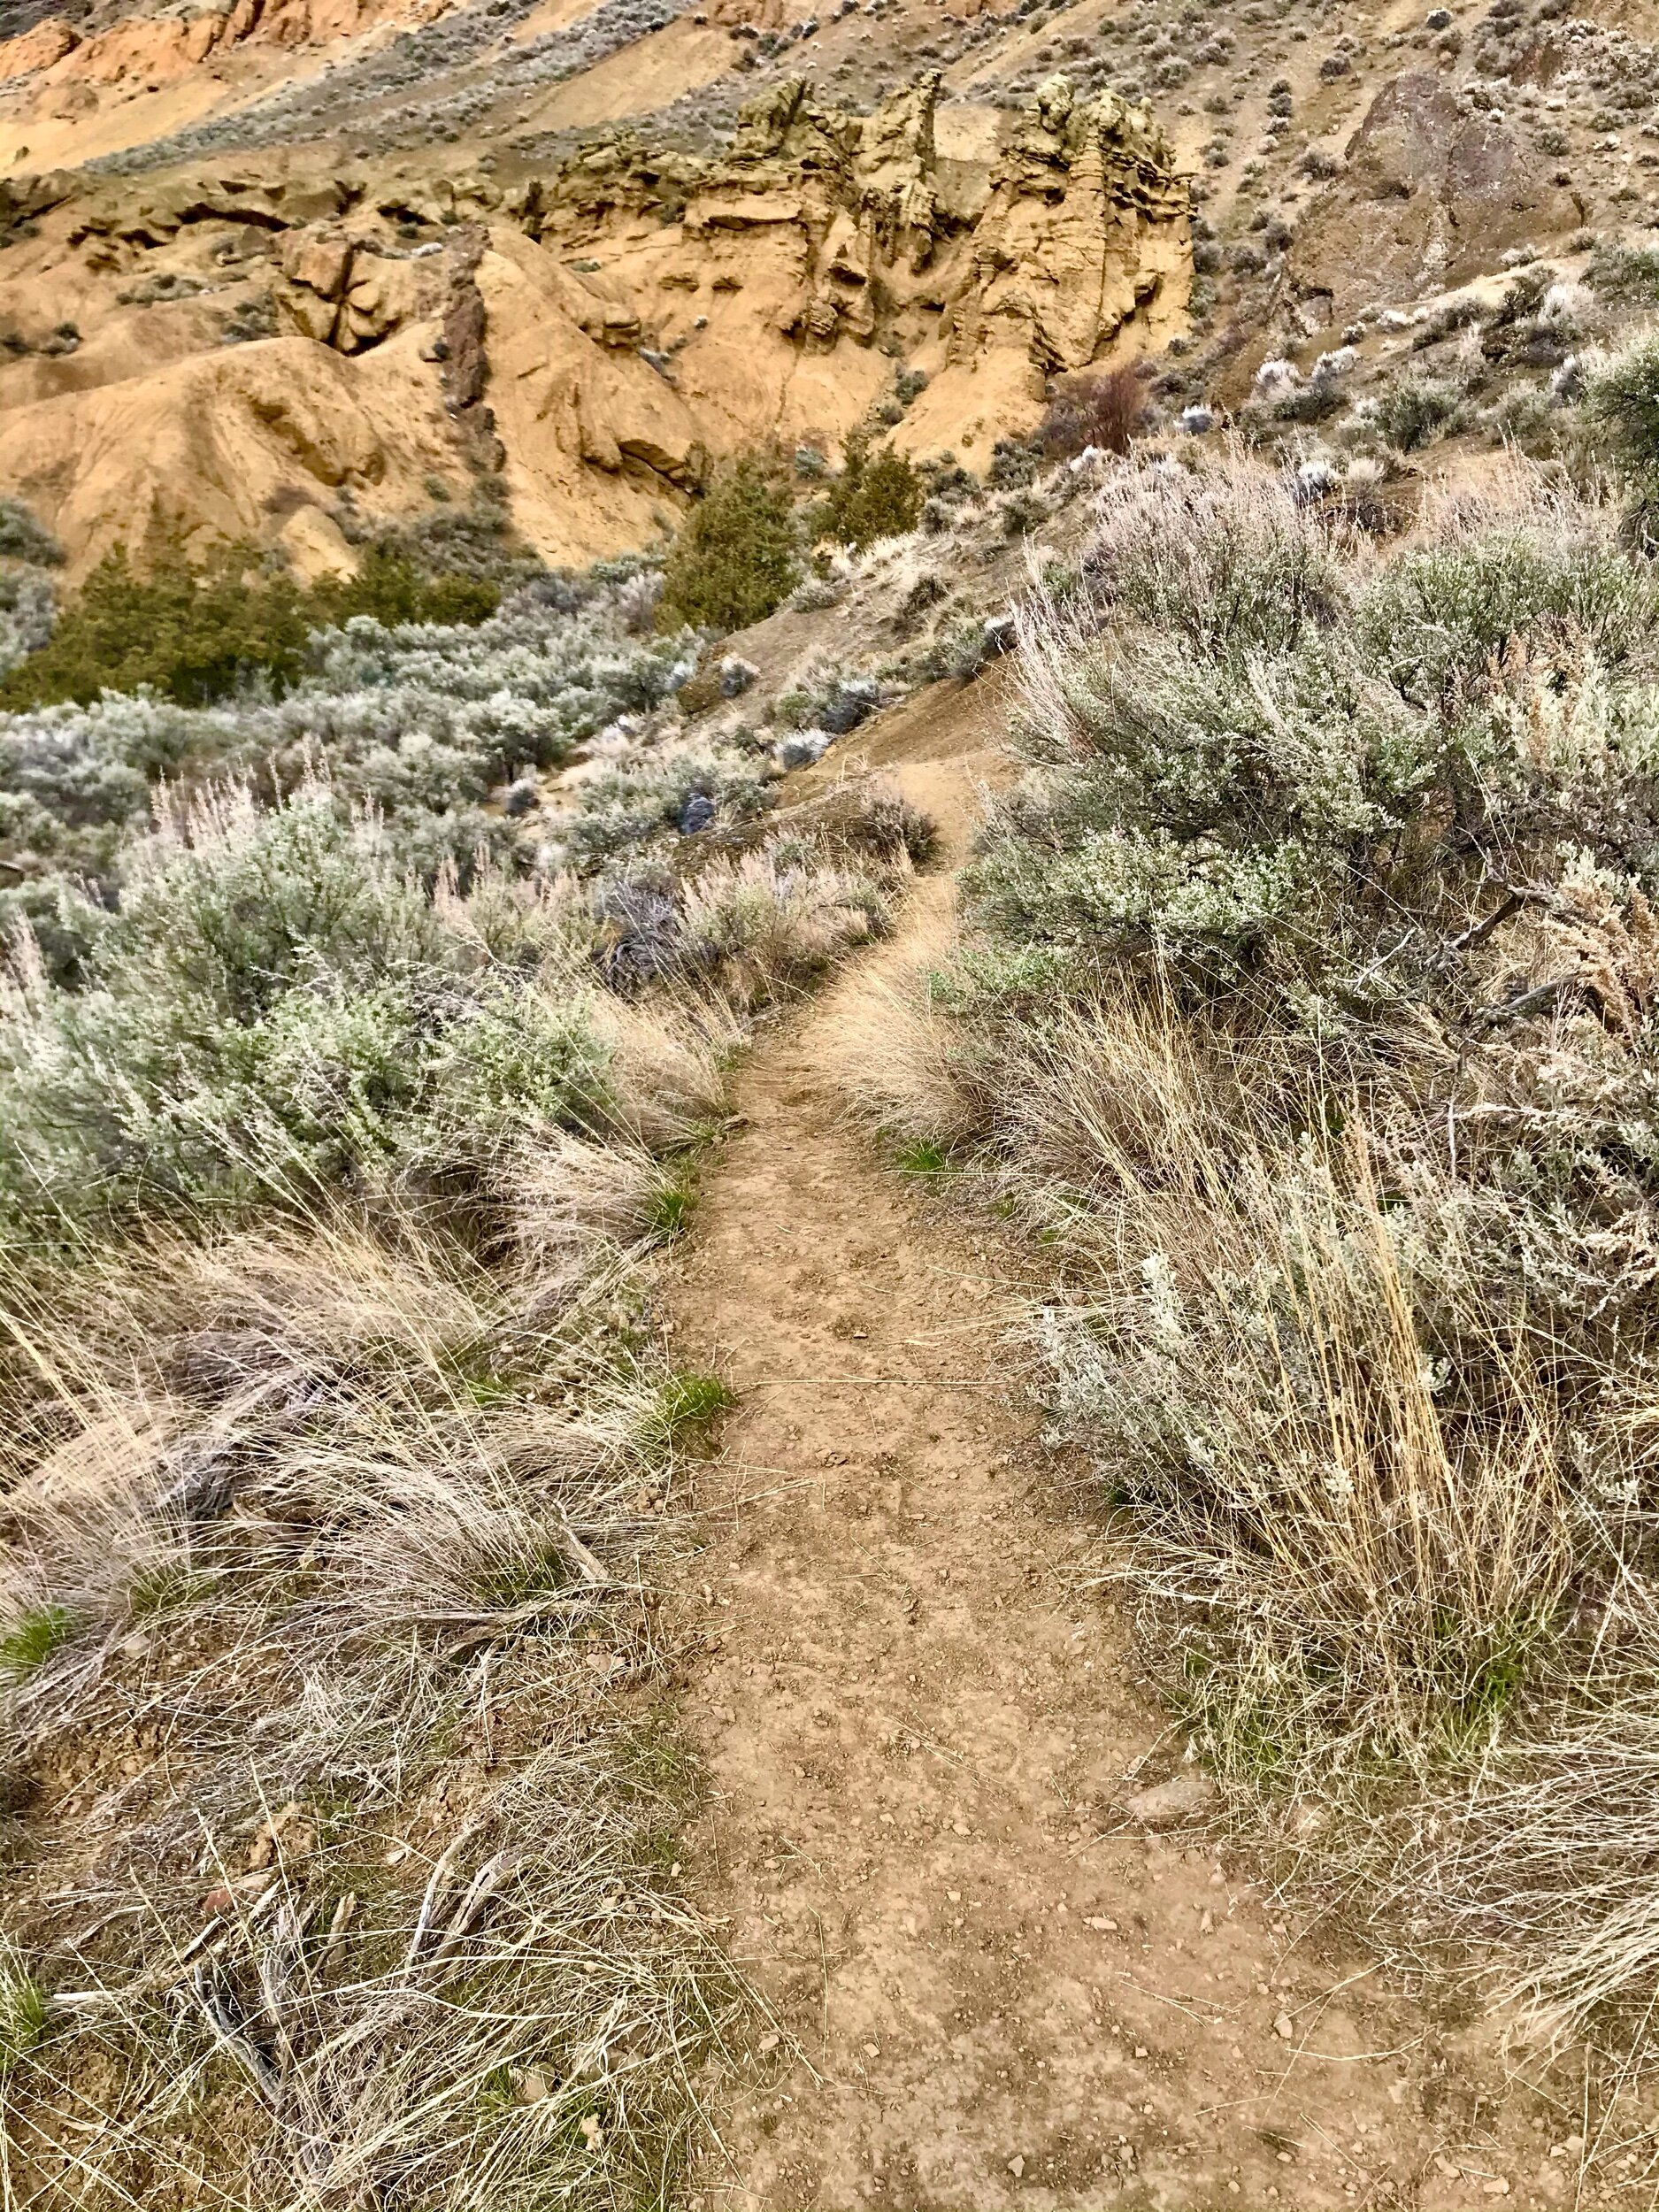 The sandy and winding trail